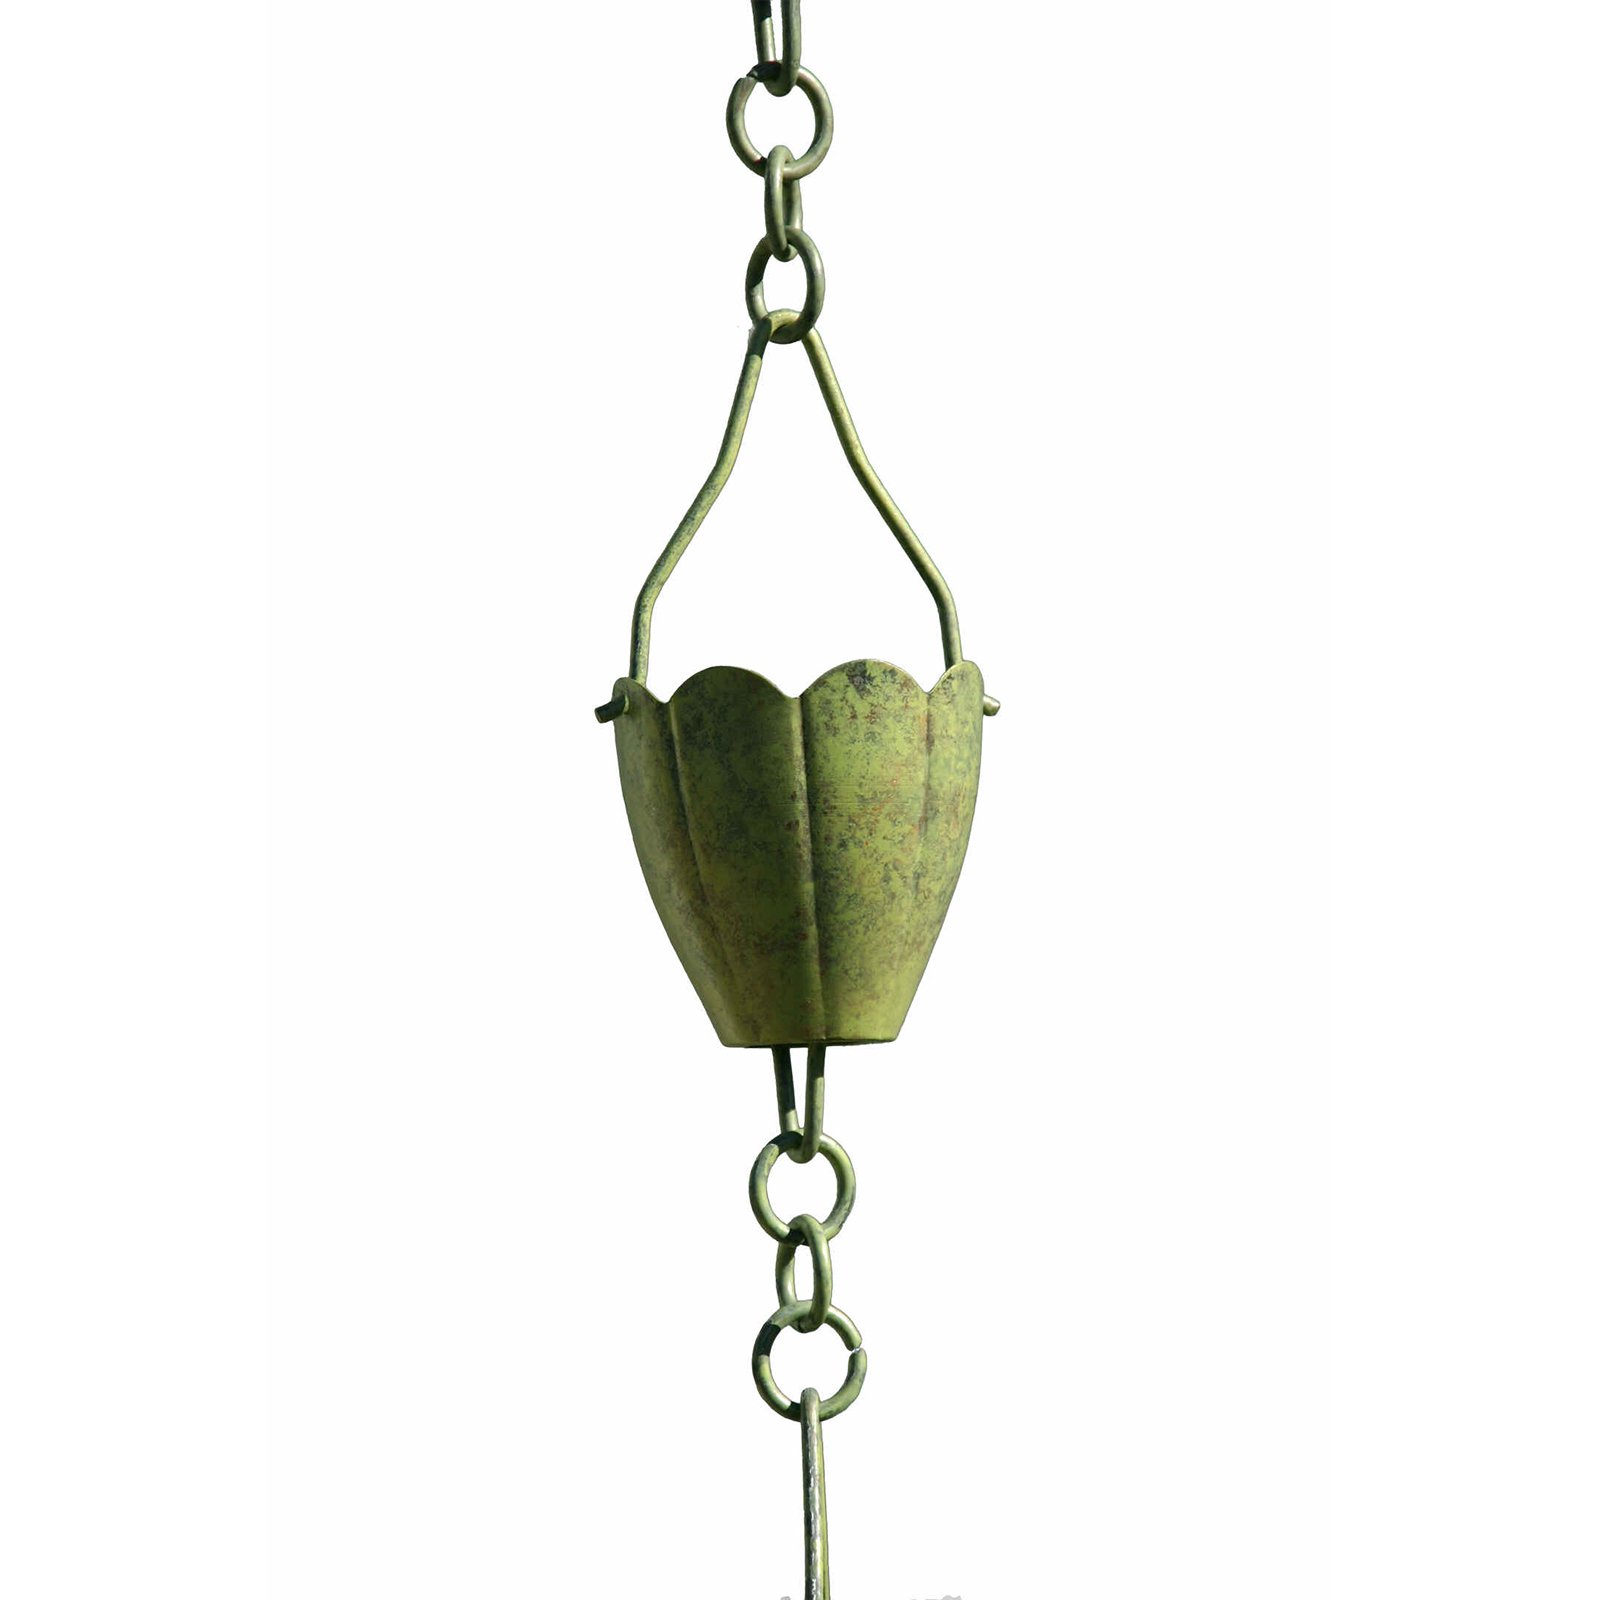 Patina Products Verdigris Flower Cup Rain Chain R253 - image 3 of 3